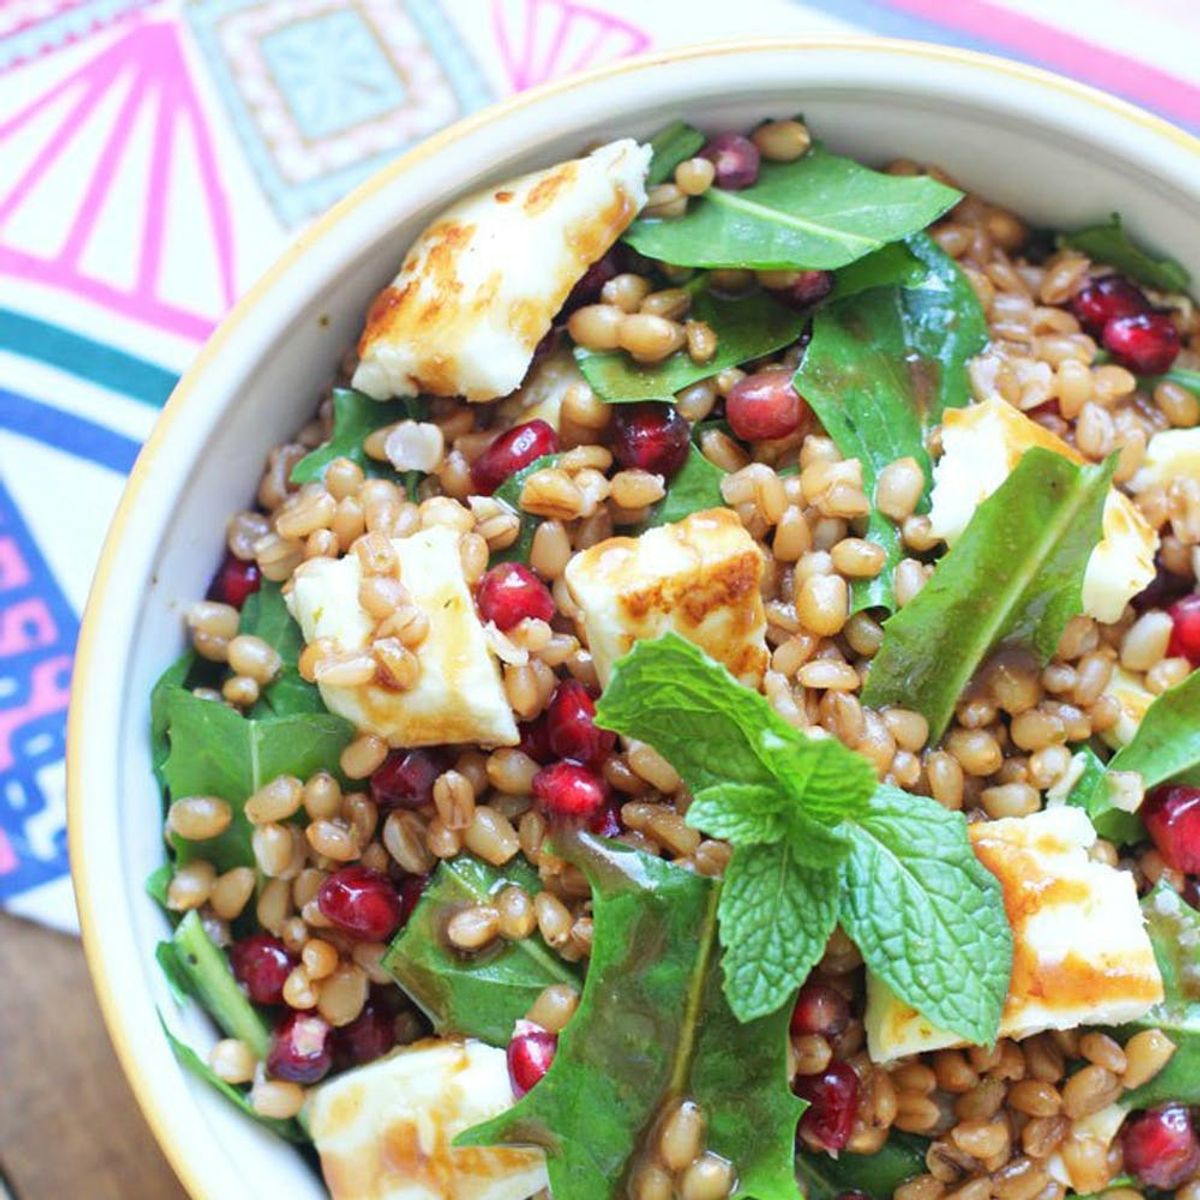 6 Reasons Wheat Berries Should Be Your New Go-to Whole Grain